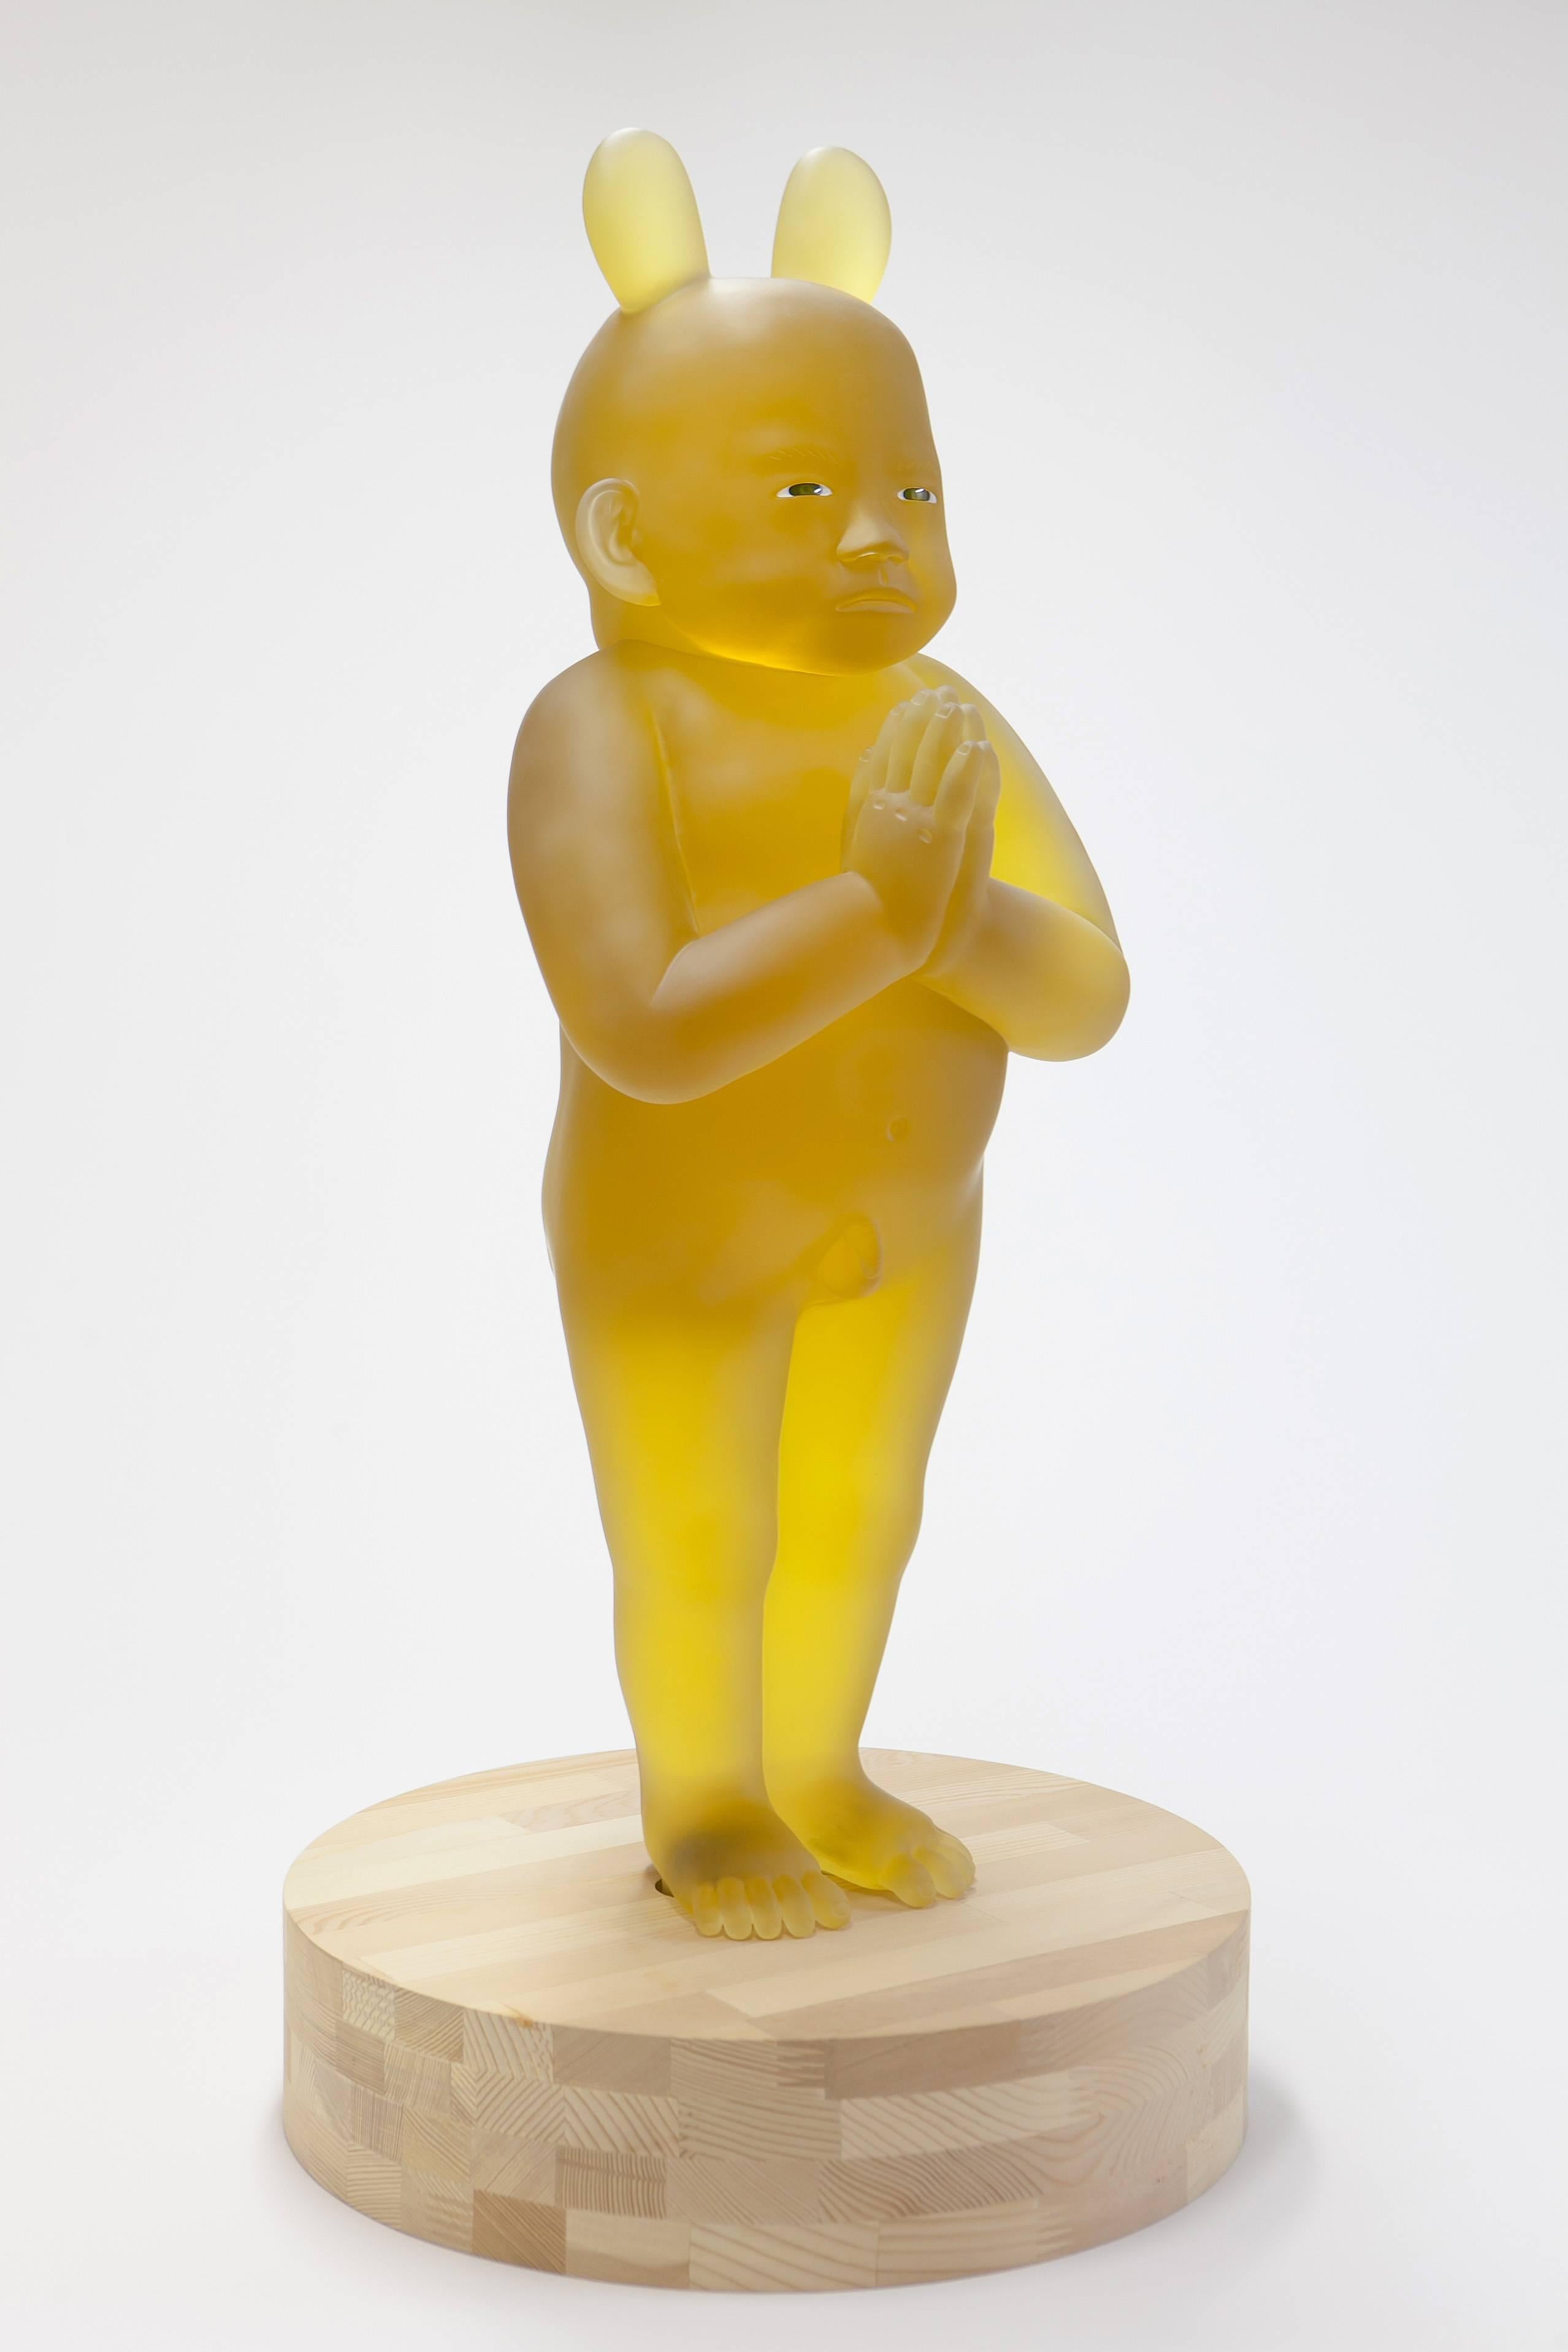 ‘Standing Baby of Kounenbutsu’ is a figurative cast glass sculpture created by Japanese artist Koichi Matsufuji in 2014. Featuring a delicate translucent golden hue, this cast glass sculpture depicts a baby in a standing position, his hands joined